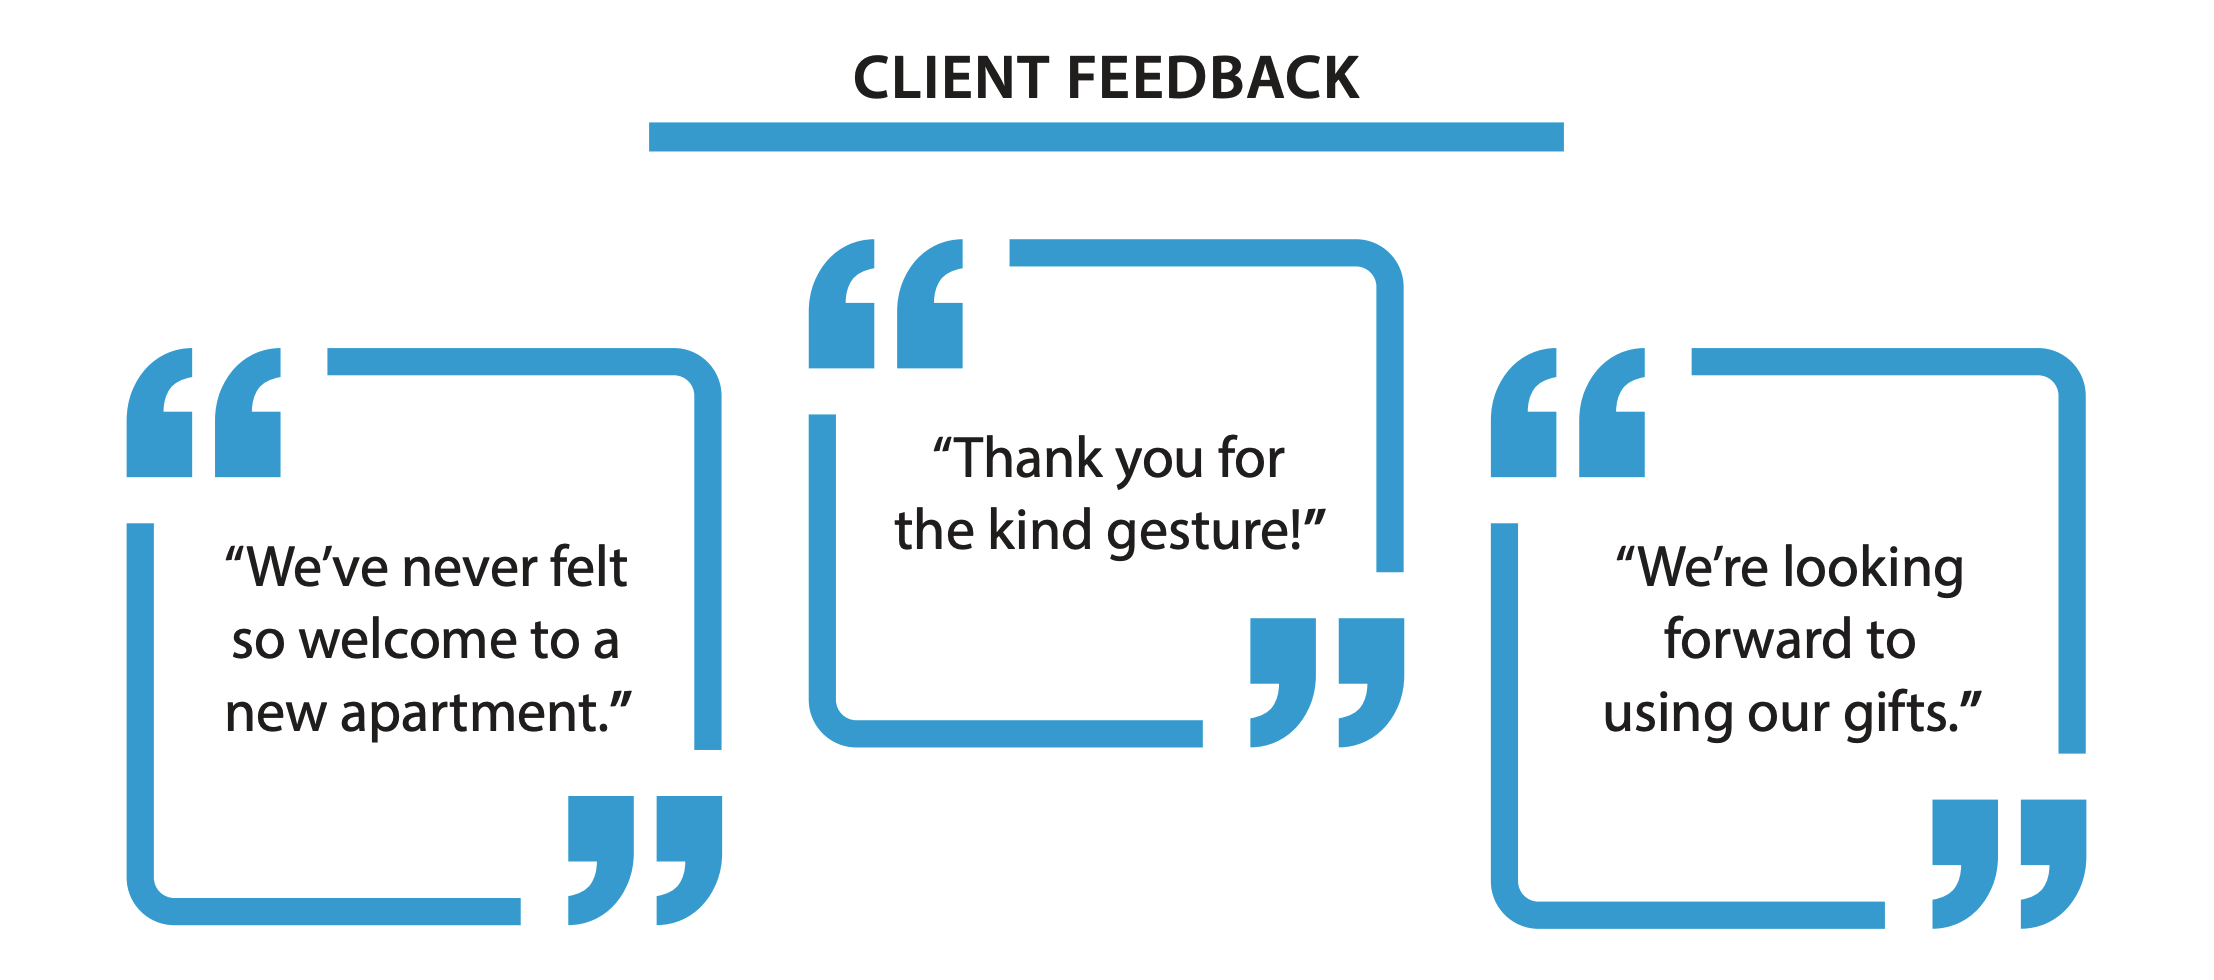 Satisfied client feedback: we've never felt so welcome, thank you for the kind gesture, we look forward to using our gifts